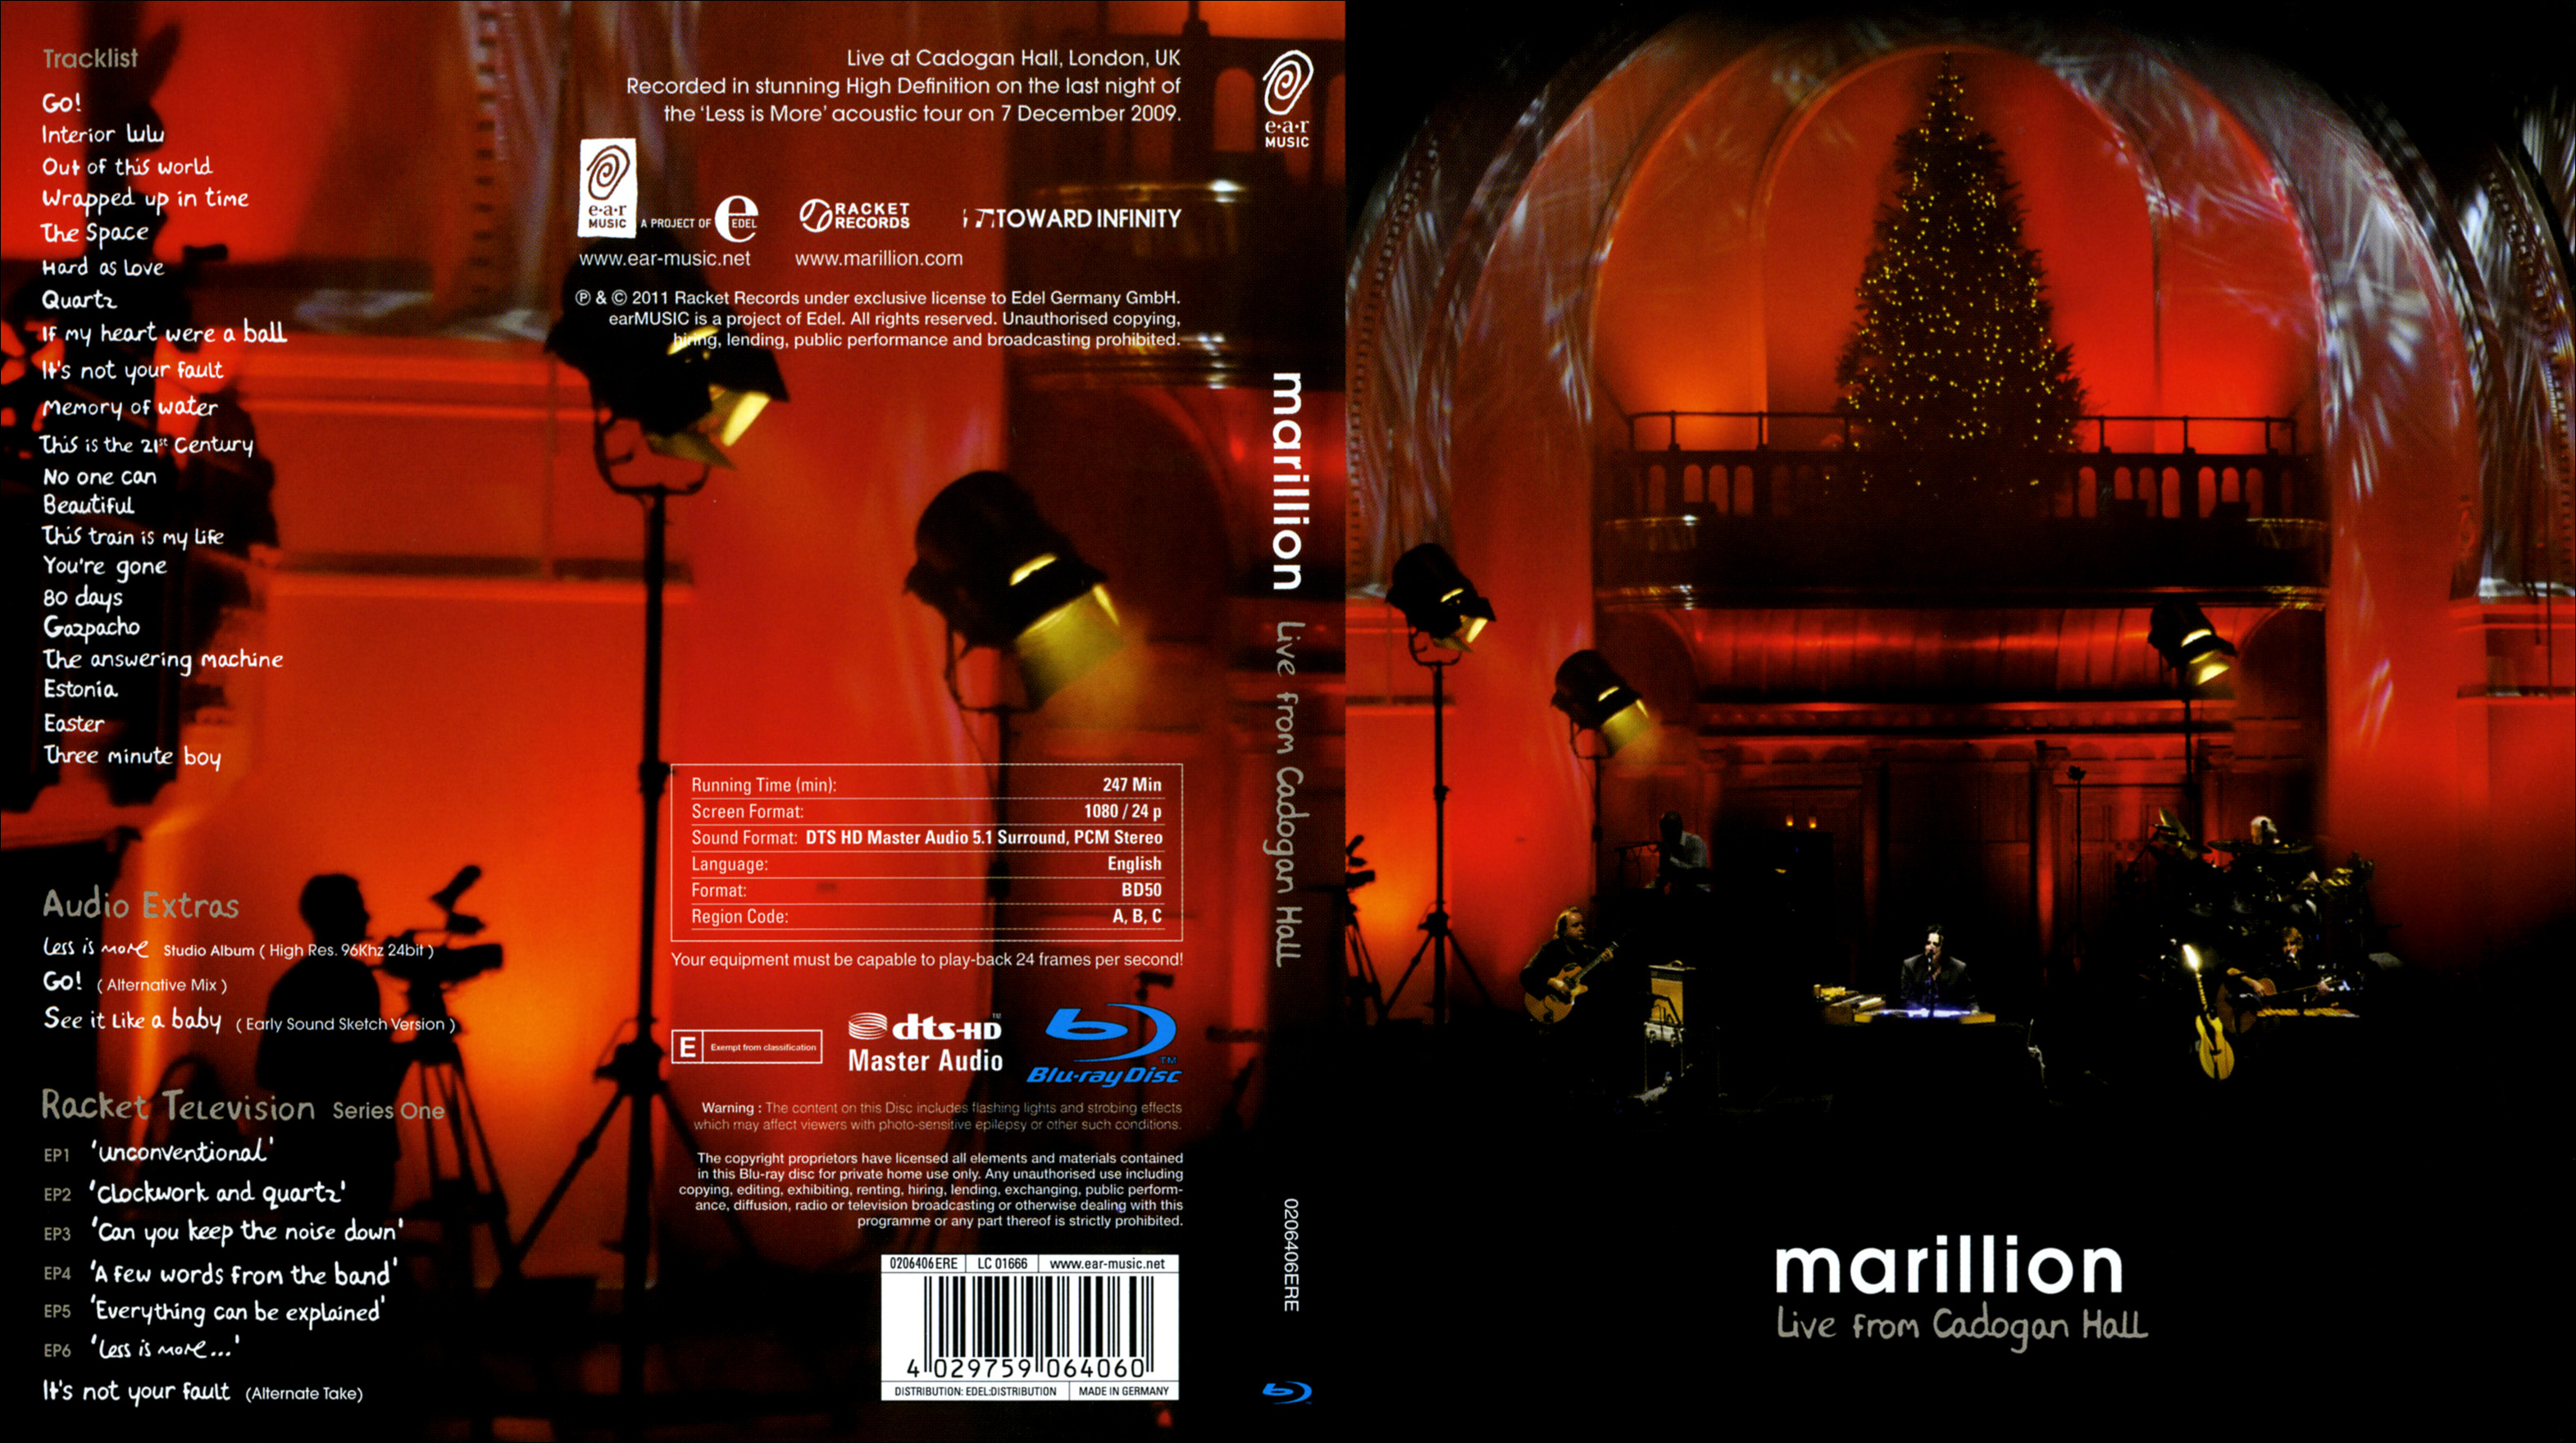 Jaquette DVD Marillion Live from Cadogan Hall (BLU-RAY)